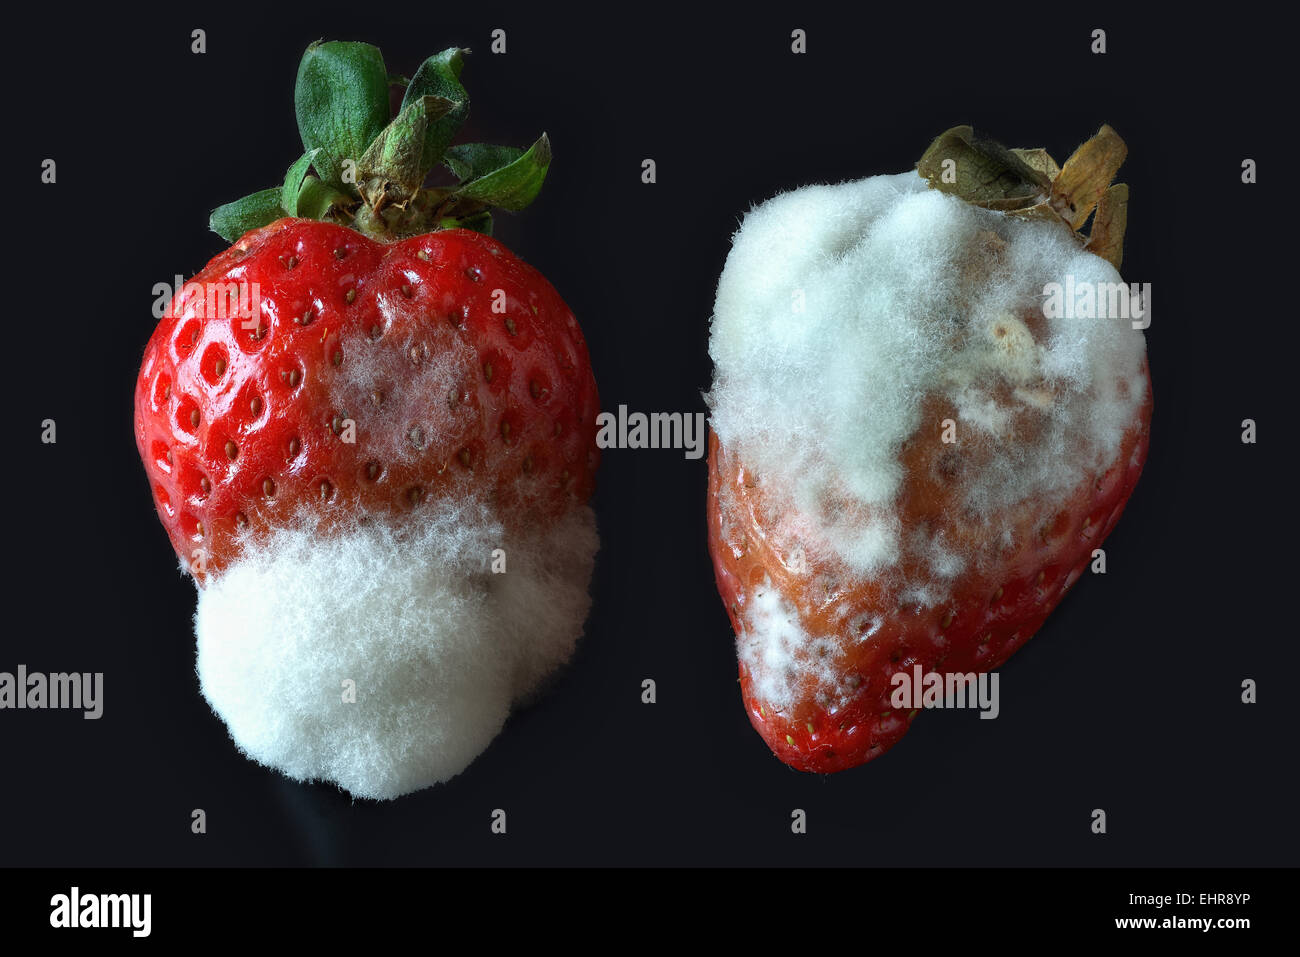 Grey Mould or Gray Mold (Botrytis cinerea), on strawberries Stock Photo